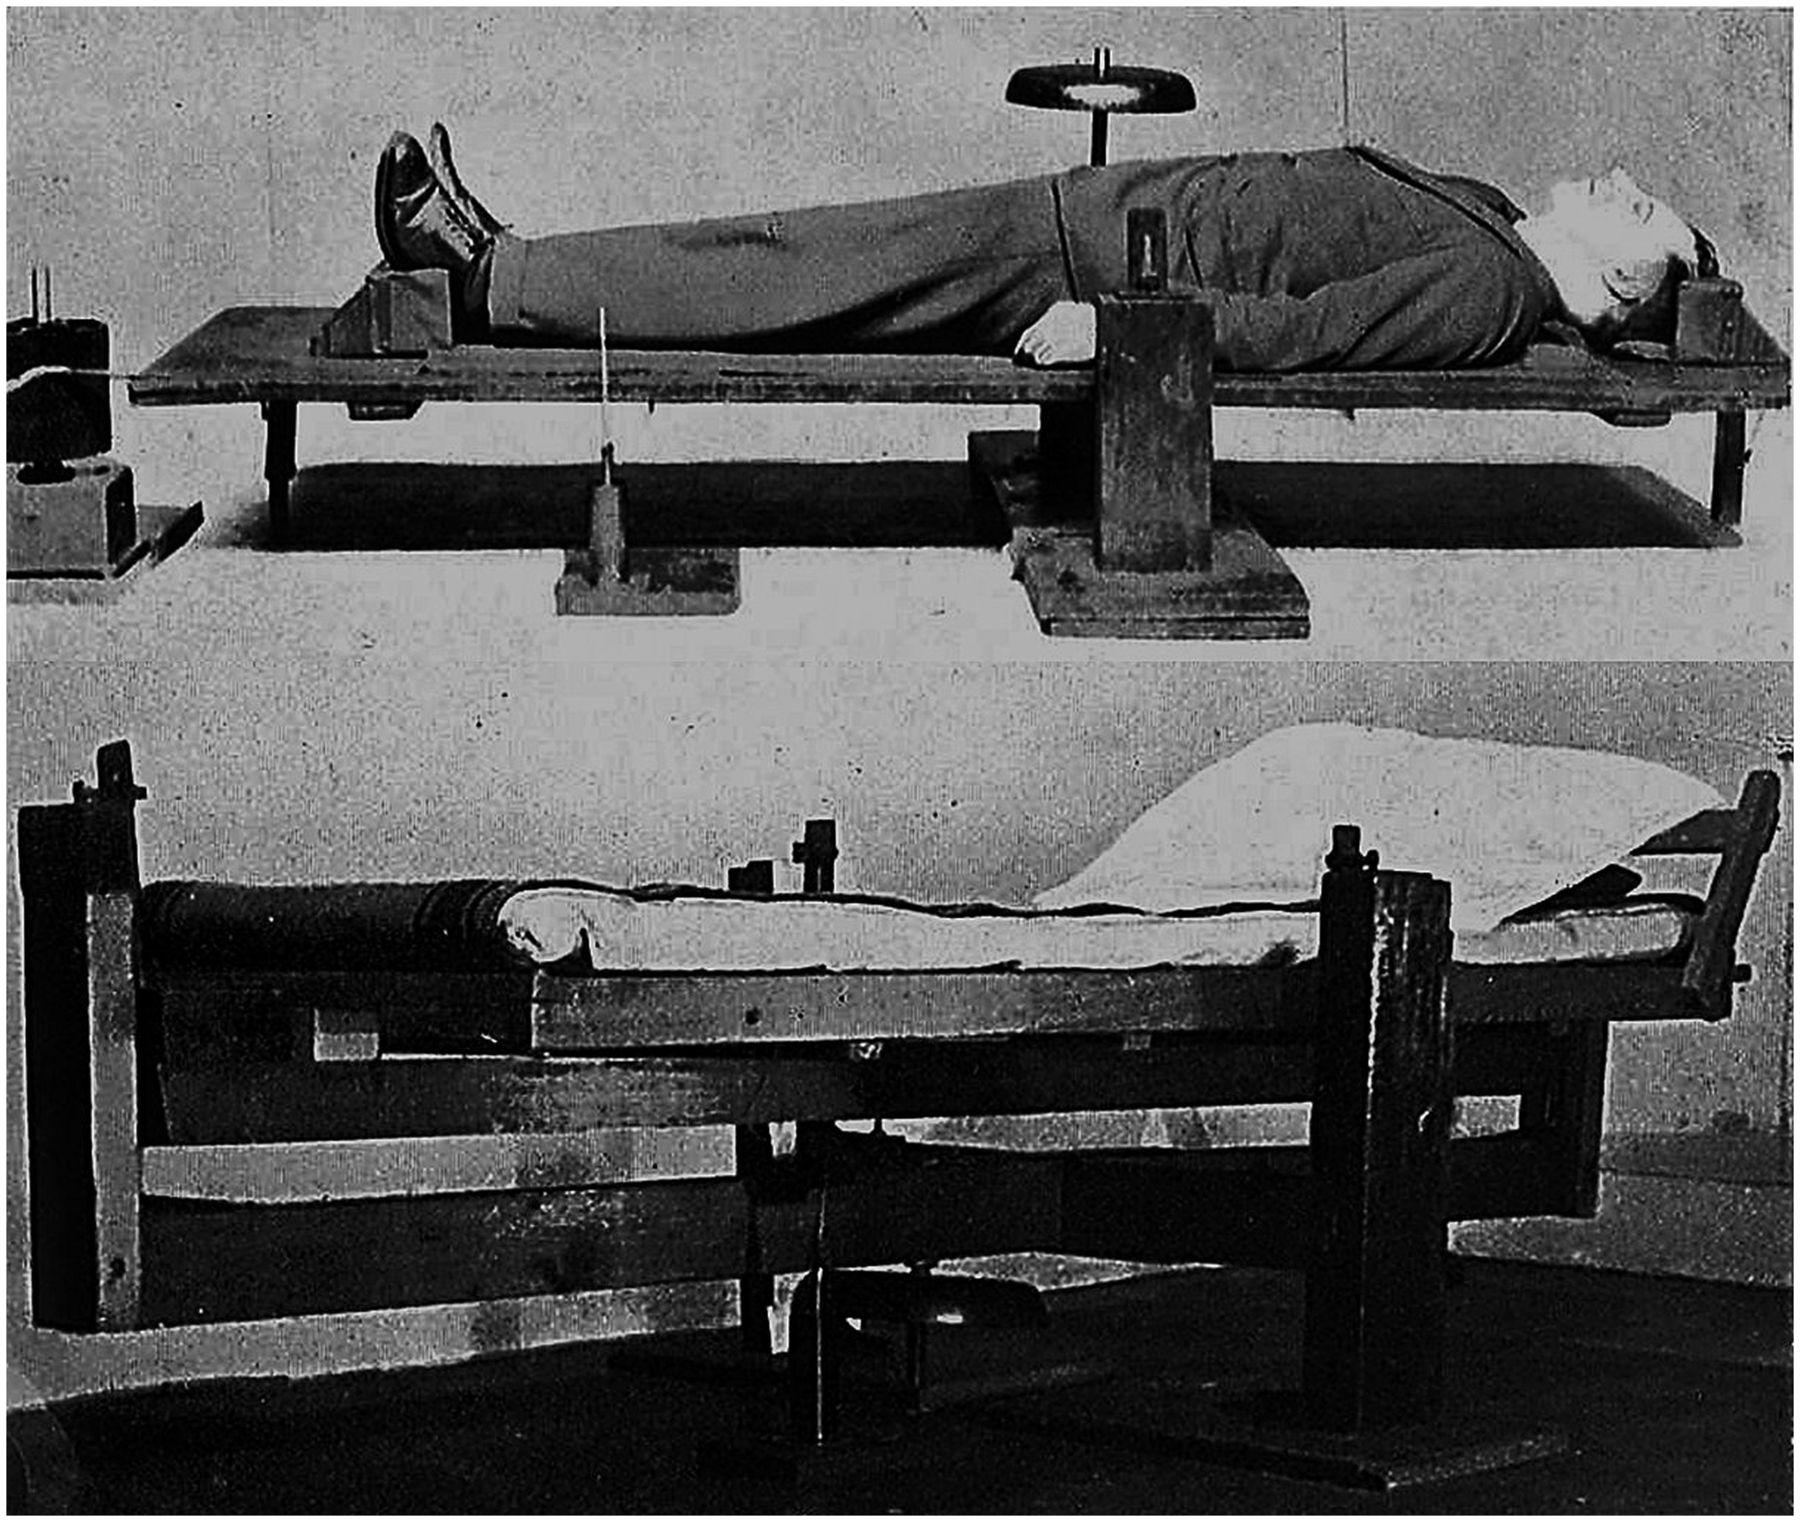 Two images (one above the other) of a wooden apparatus. The apparatus consists of a flat wooden board, held in air by a stand in the middle, keeping it balanced. In the top image, a man is lying on his back on top of the board.